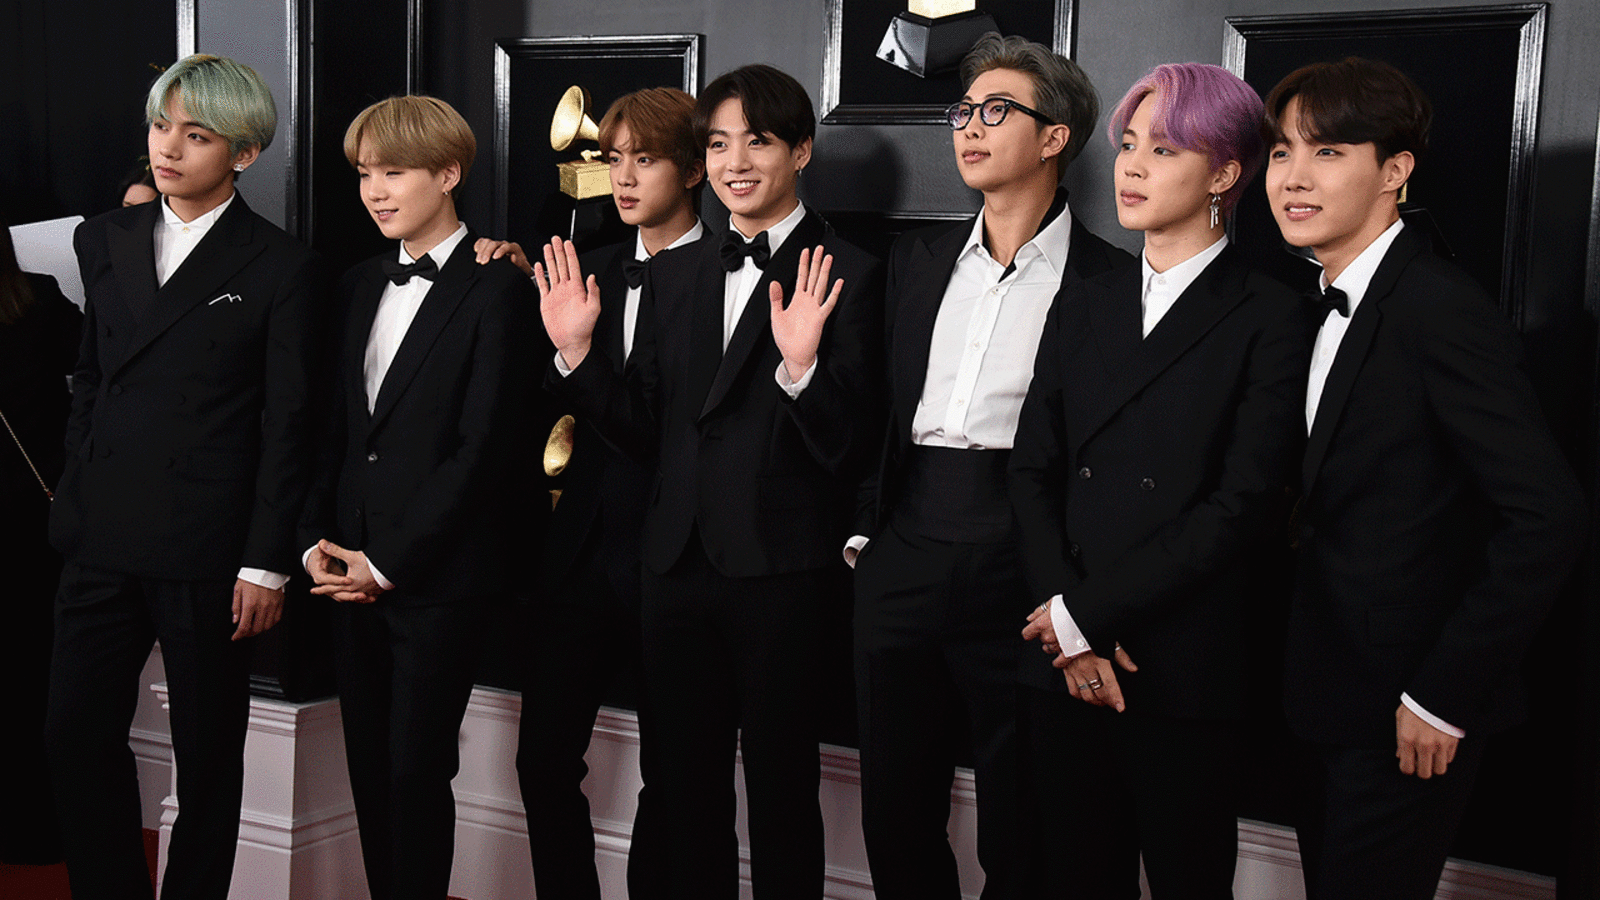 BTS drops new album and 'Boy with Luv' music video featuring Halsey